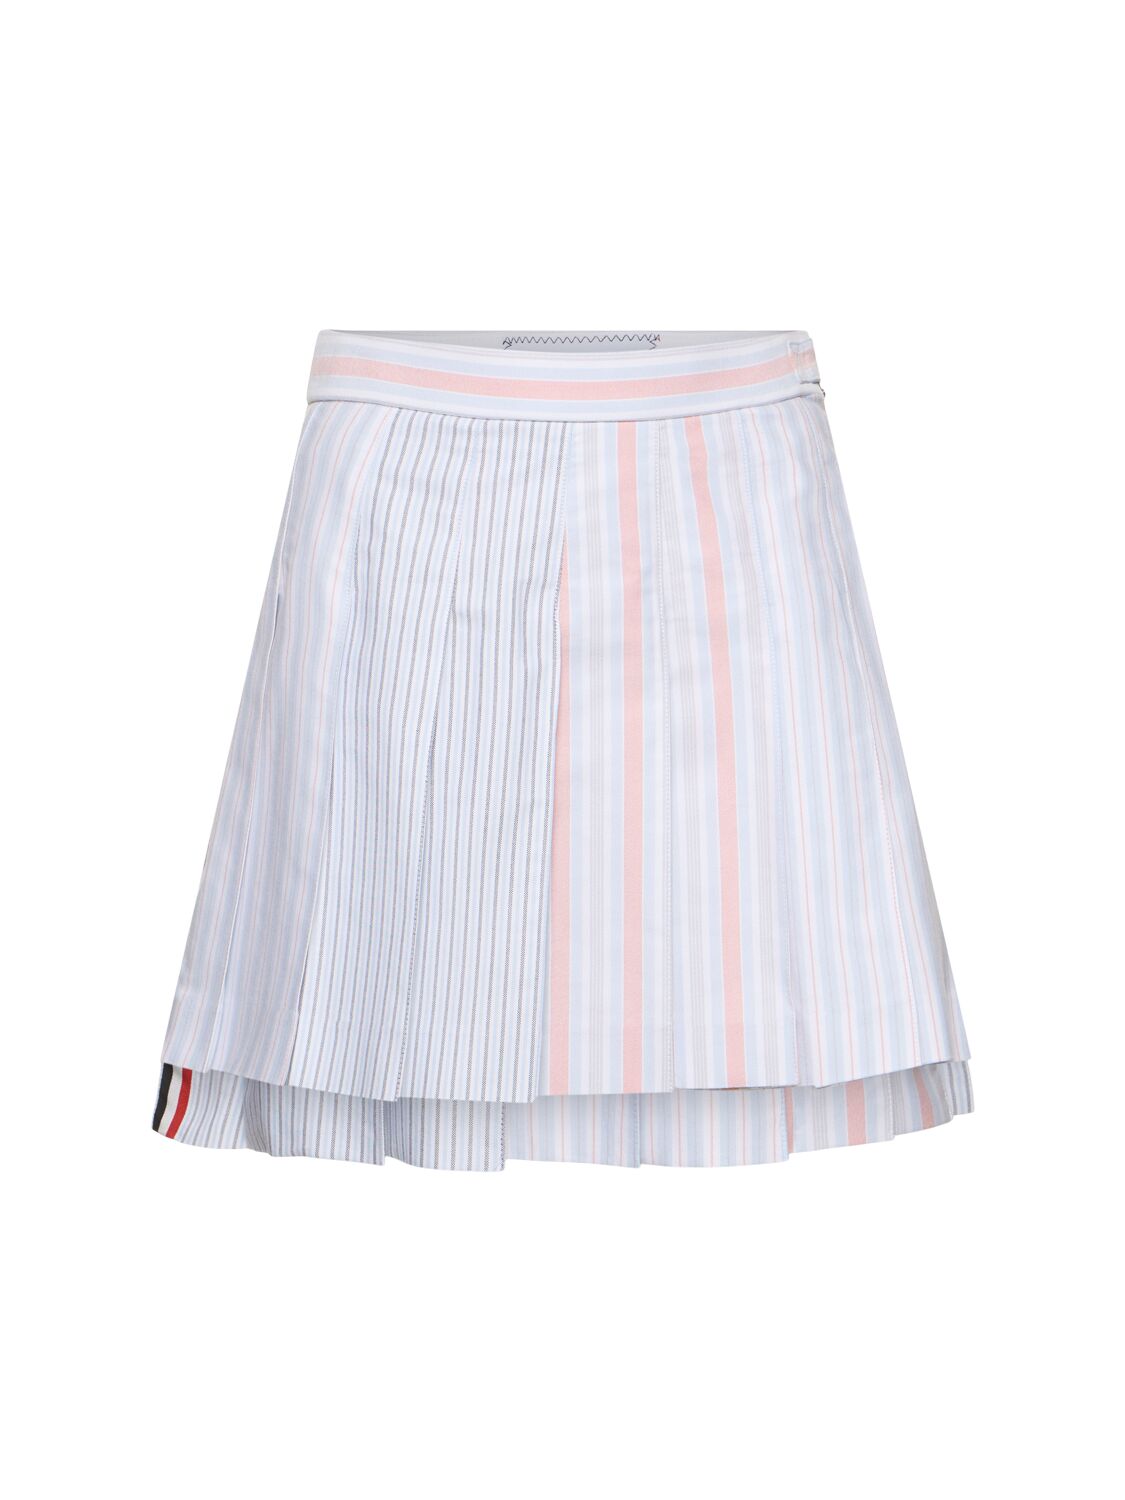 Image of Striped Oxford Cotton Pleated Mini Skirt